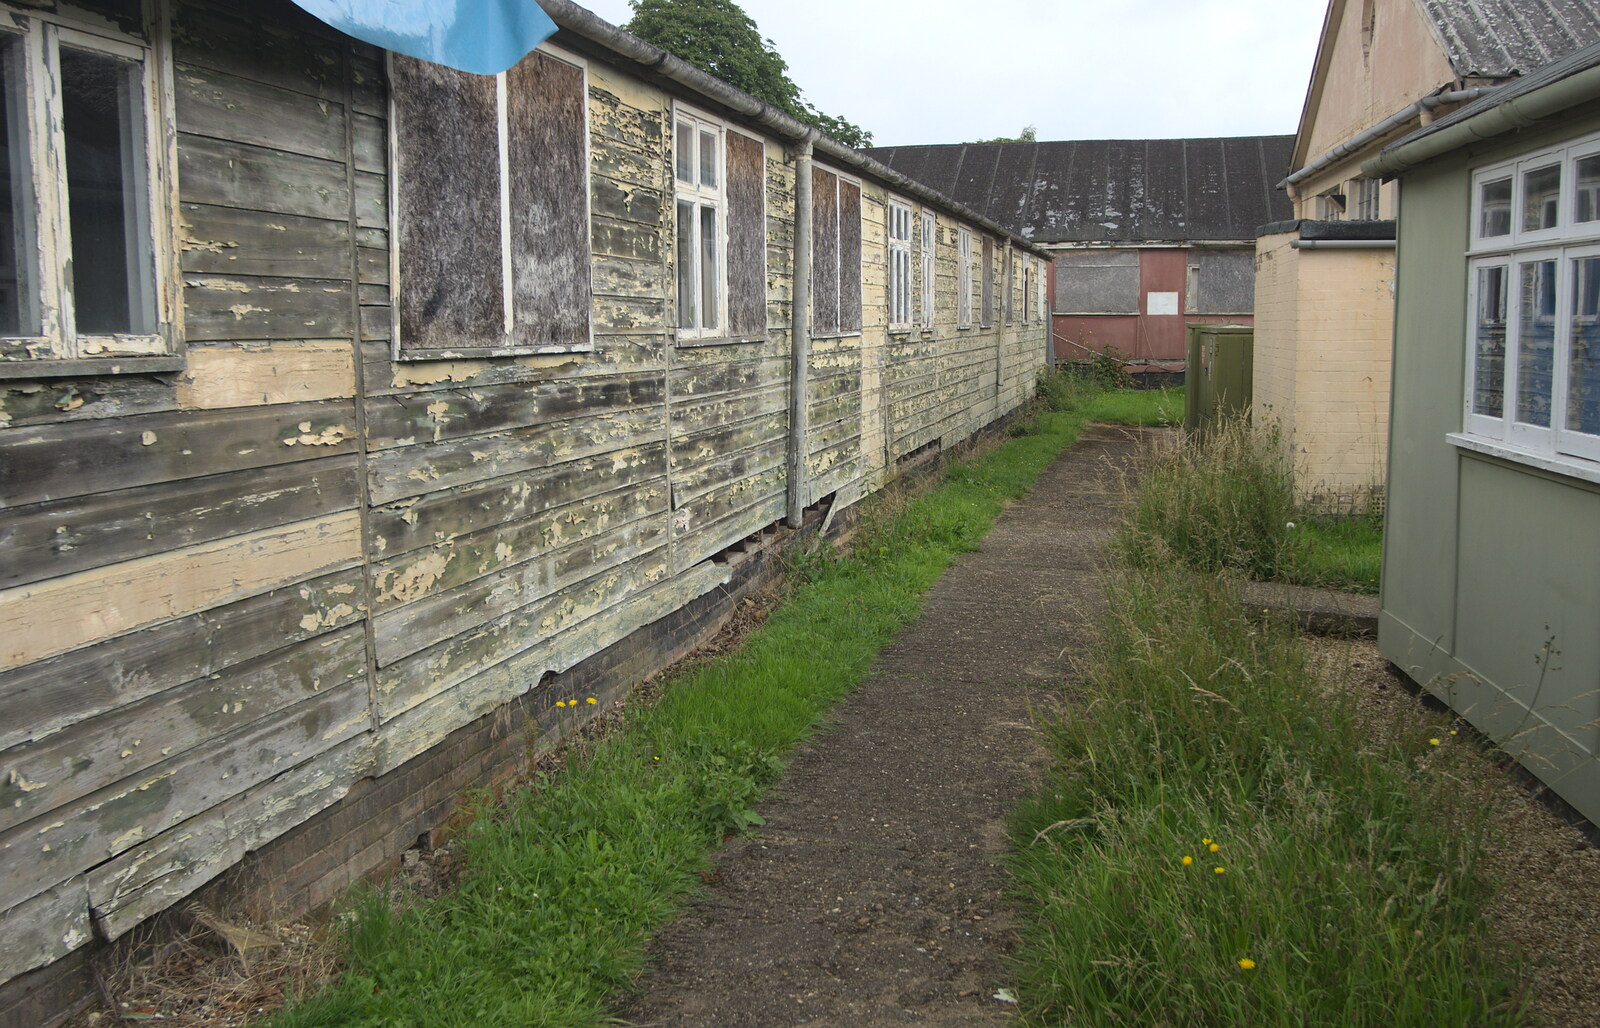 Some more dilapidated wooden huts from TouchType does Bletchley Park, Bletchley, Bedfordshire - 20th July 2012